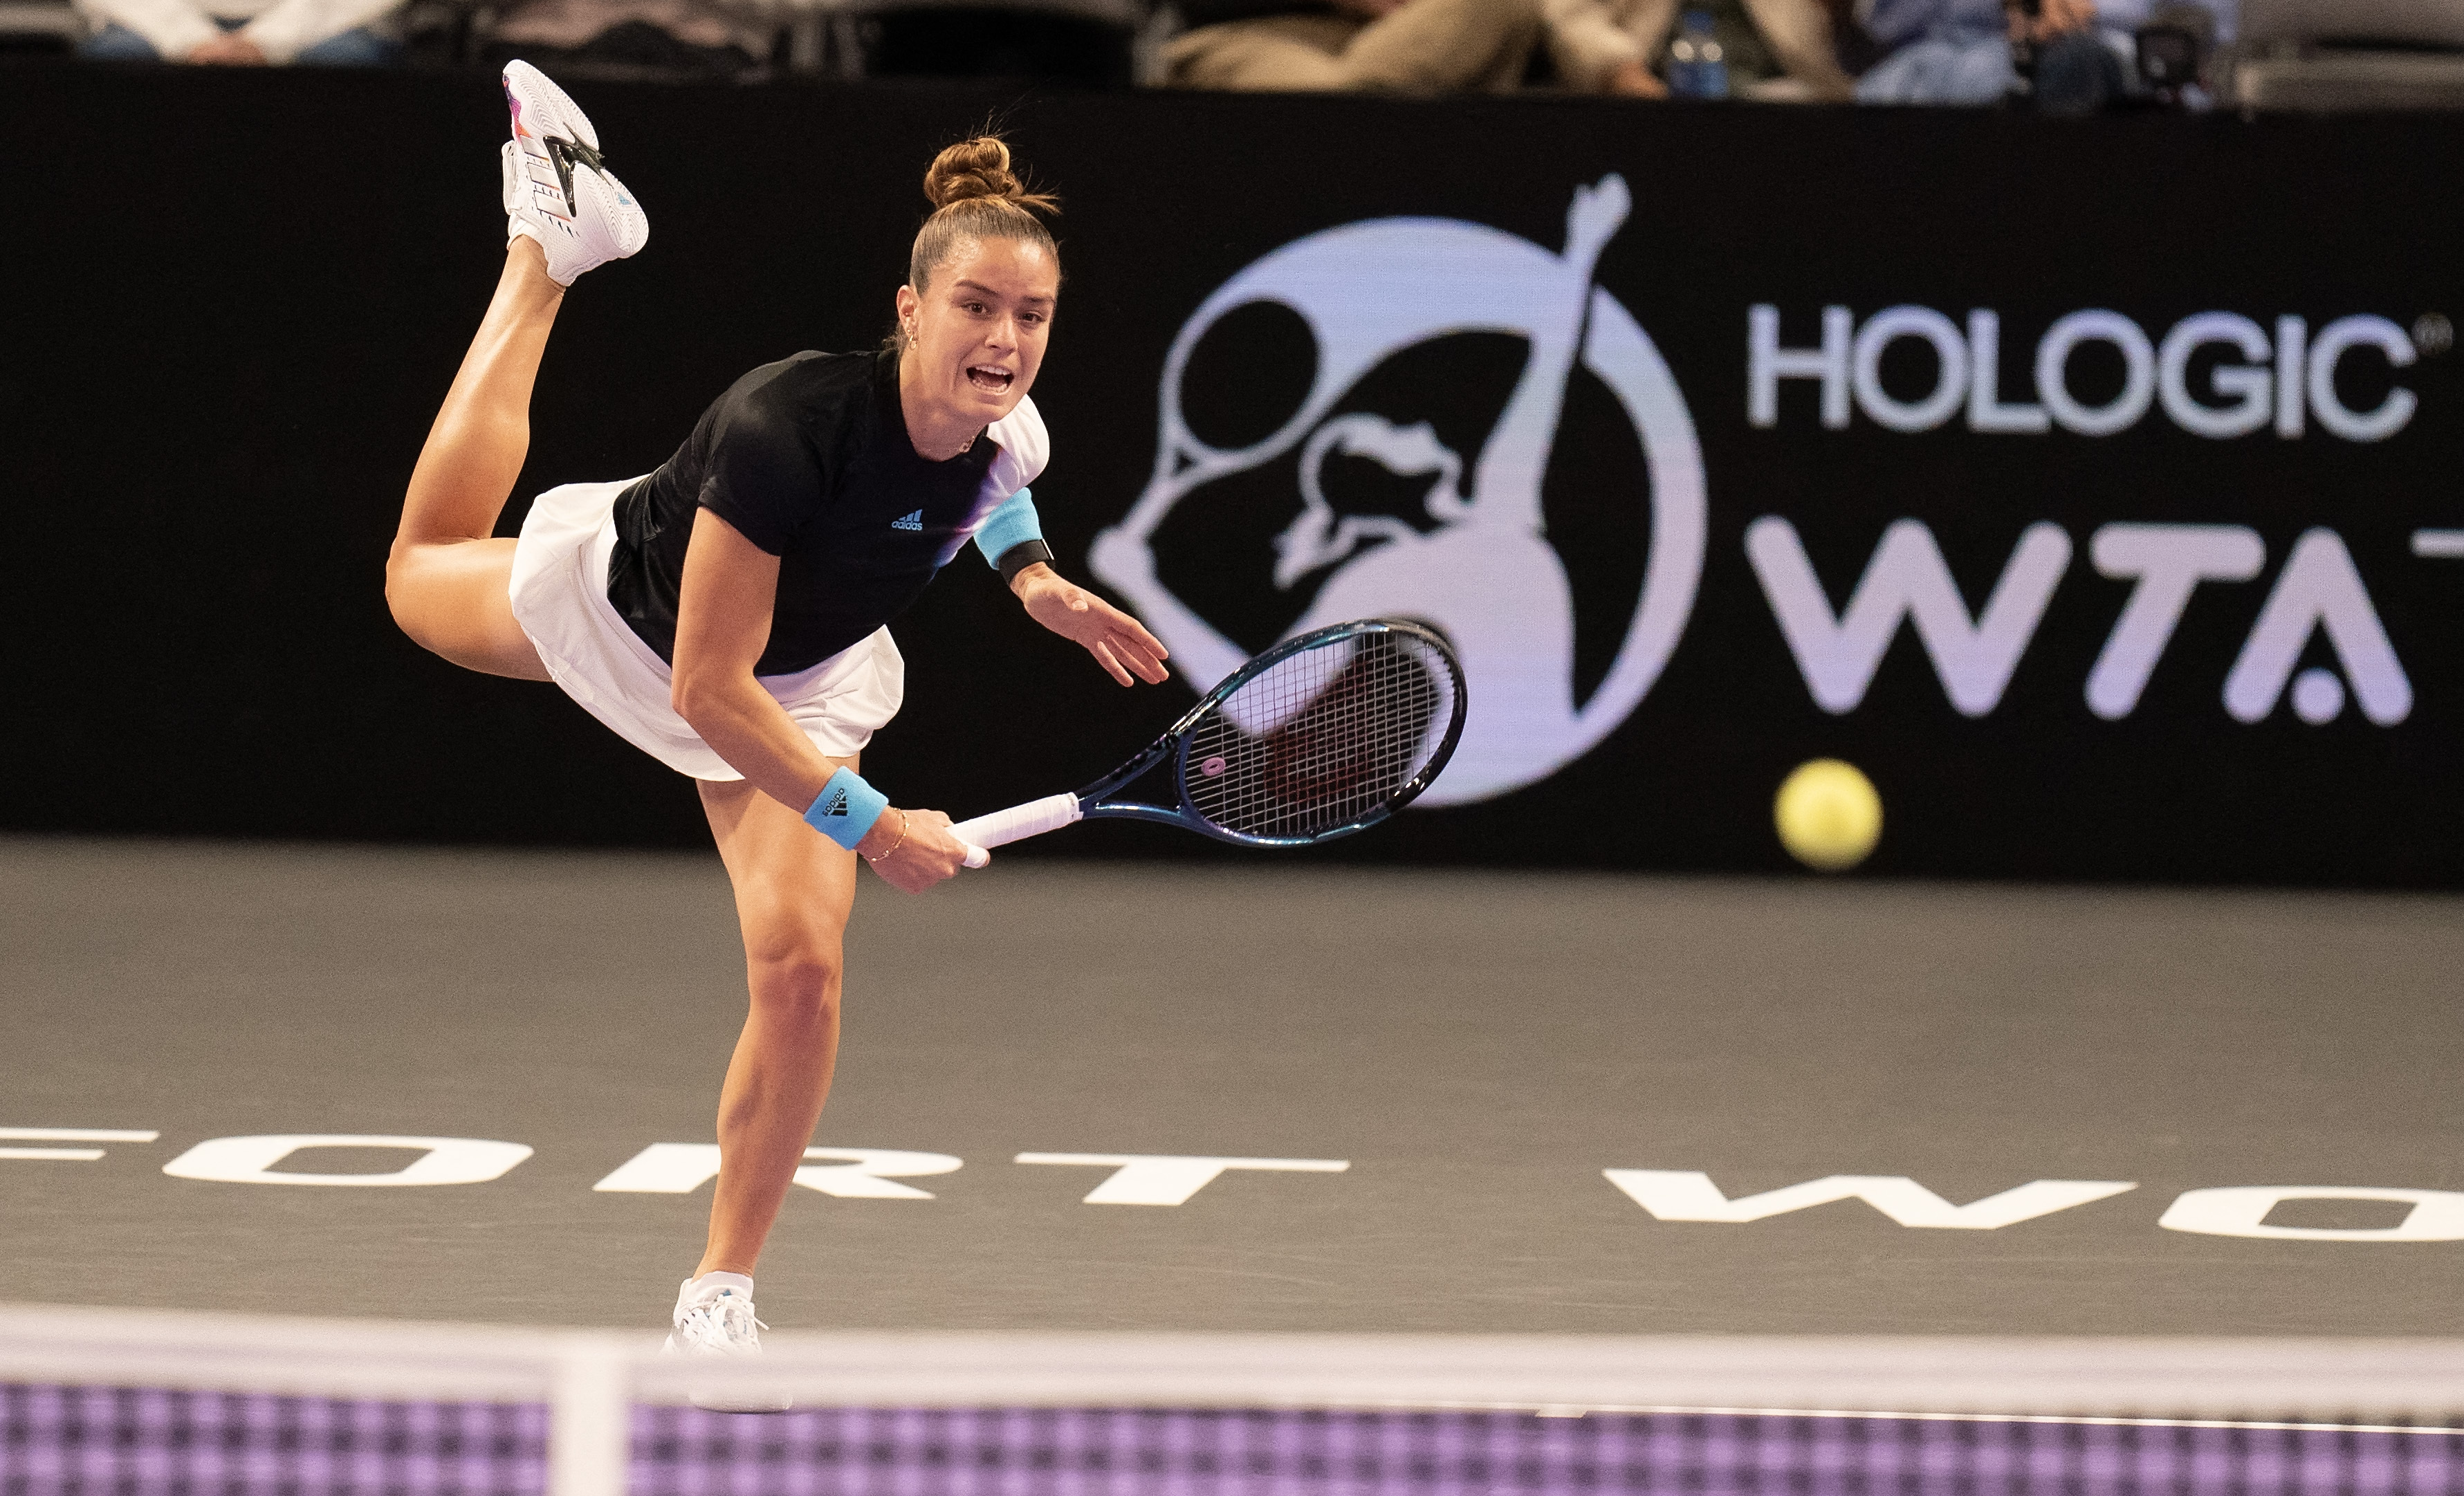 Oct 31, 2022; Forth Worth, TX, USA; Maria Sakkari (GRE) serves the ball during her match against Jessica Pegula (USA) on day one of the WTA Finals at Dickies Arena. Mandatory Credit: Susan Mullane-USA TODAY Sports